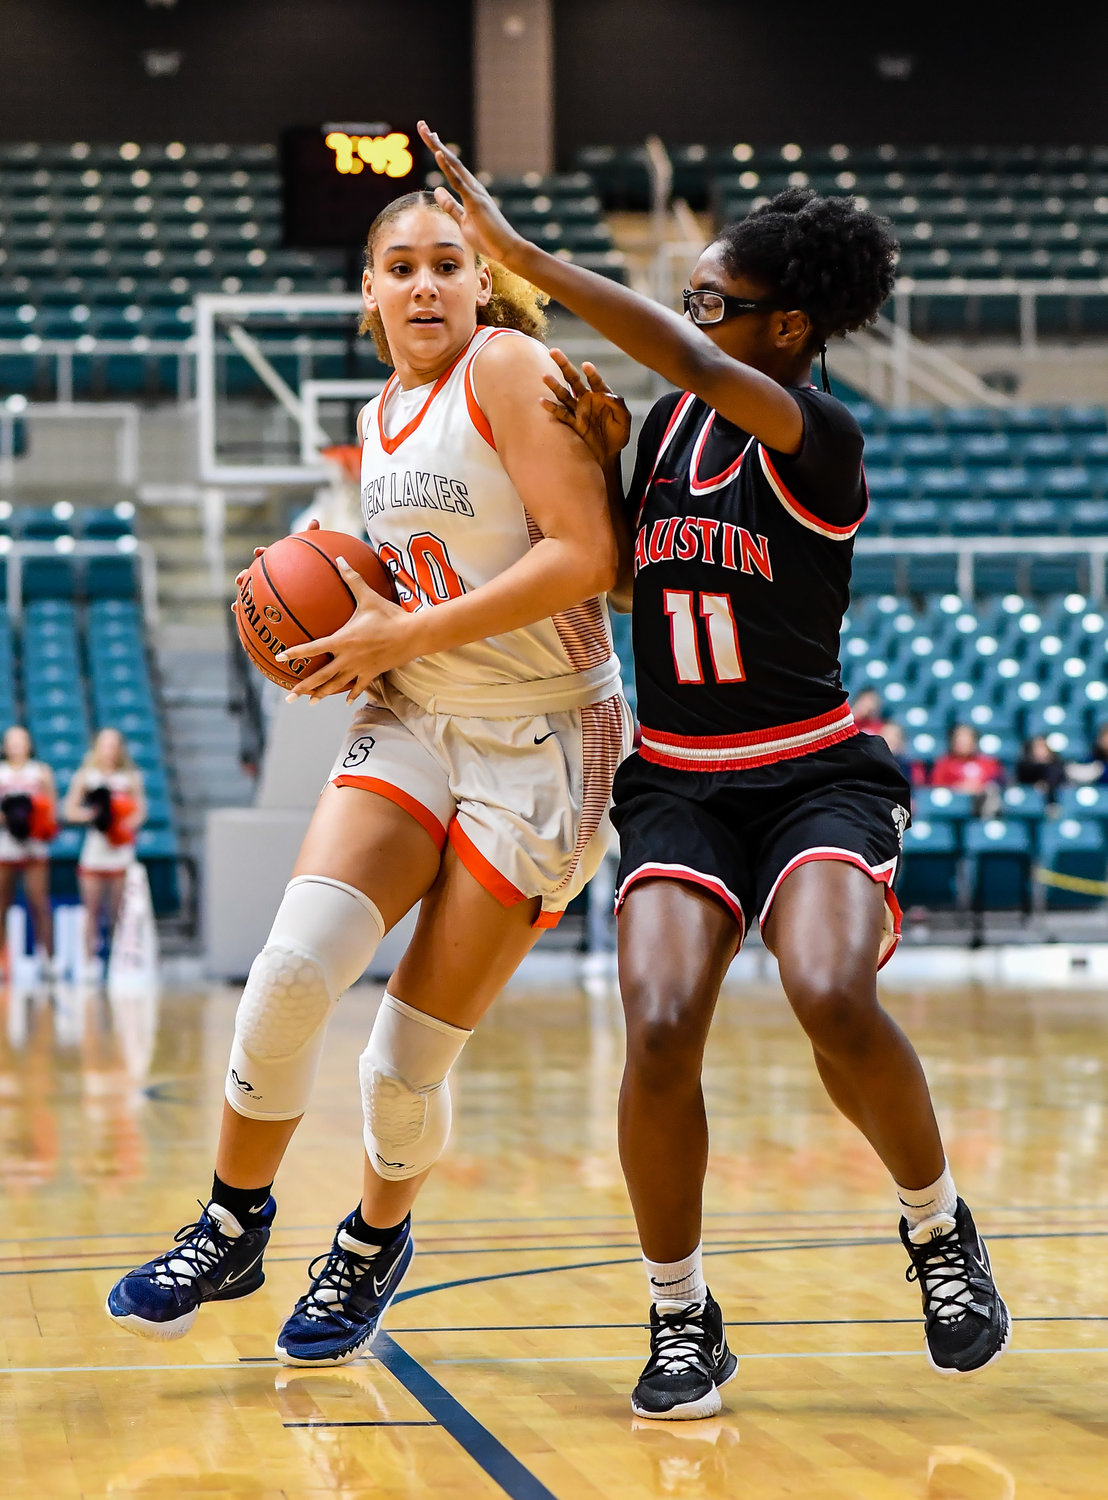 Katy Tx. Feb 22, 2022:  Seven Lakes Justice Carlton #30 drives up the lane to the basket during the Regional Quarterfinal playoff game, Seven Lakes vs Fort Bend Austin at the Merrell Center. (Photo by Mark Goodman / Katy Times)